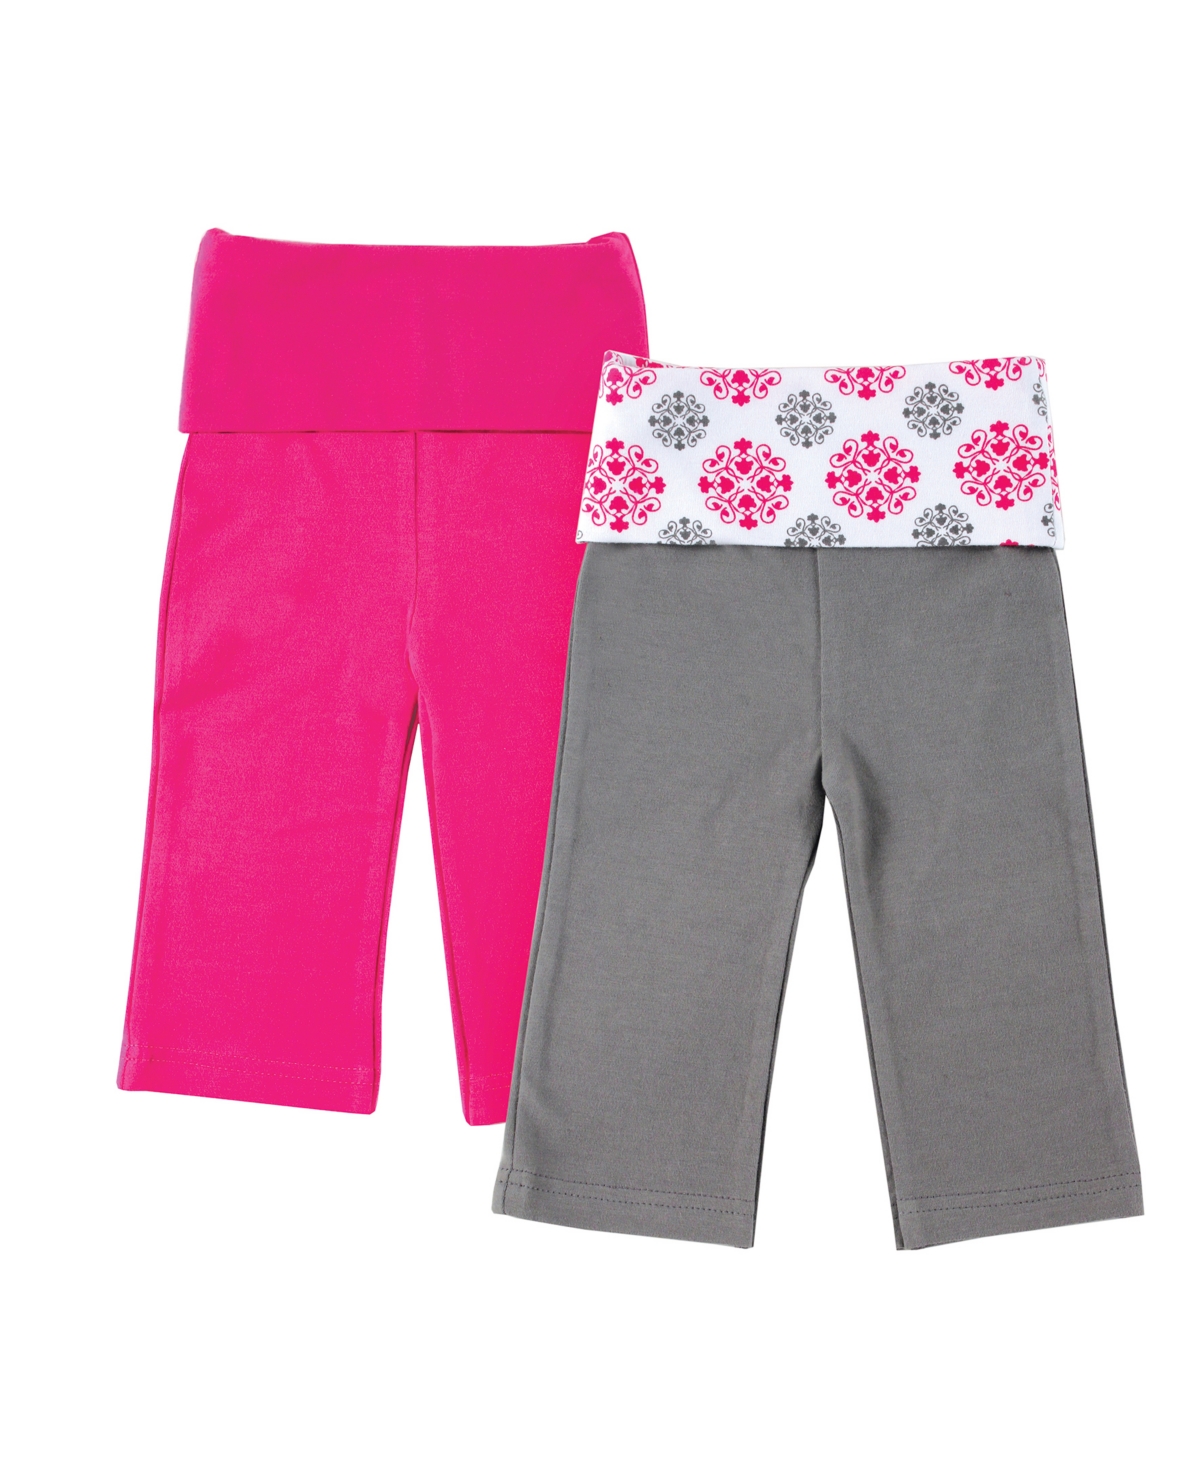 Yoga Sprout Yoga Pants, 2-Pack, 0-24 Months